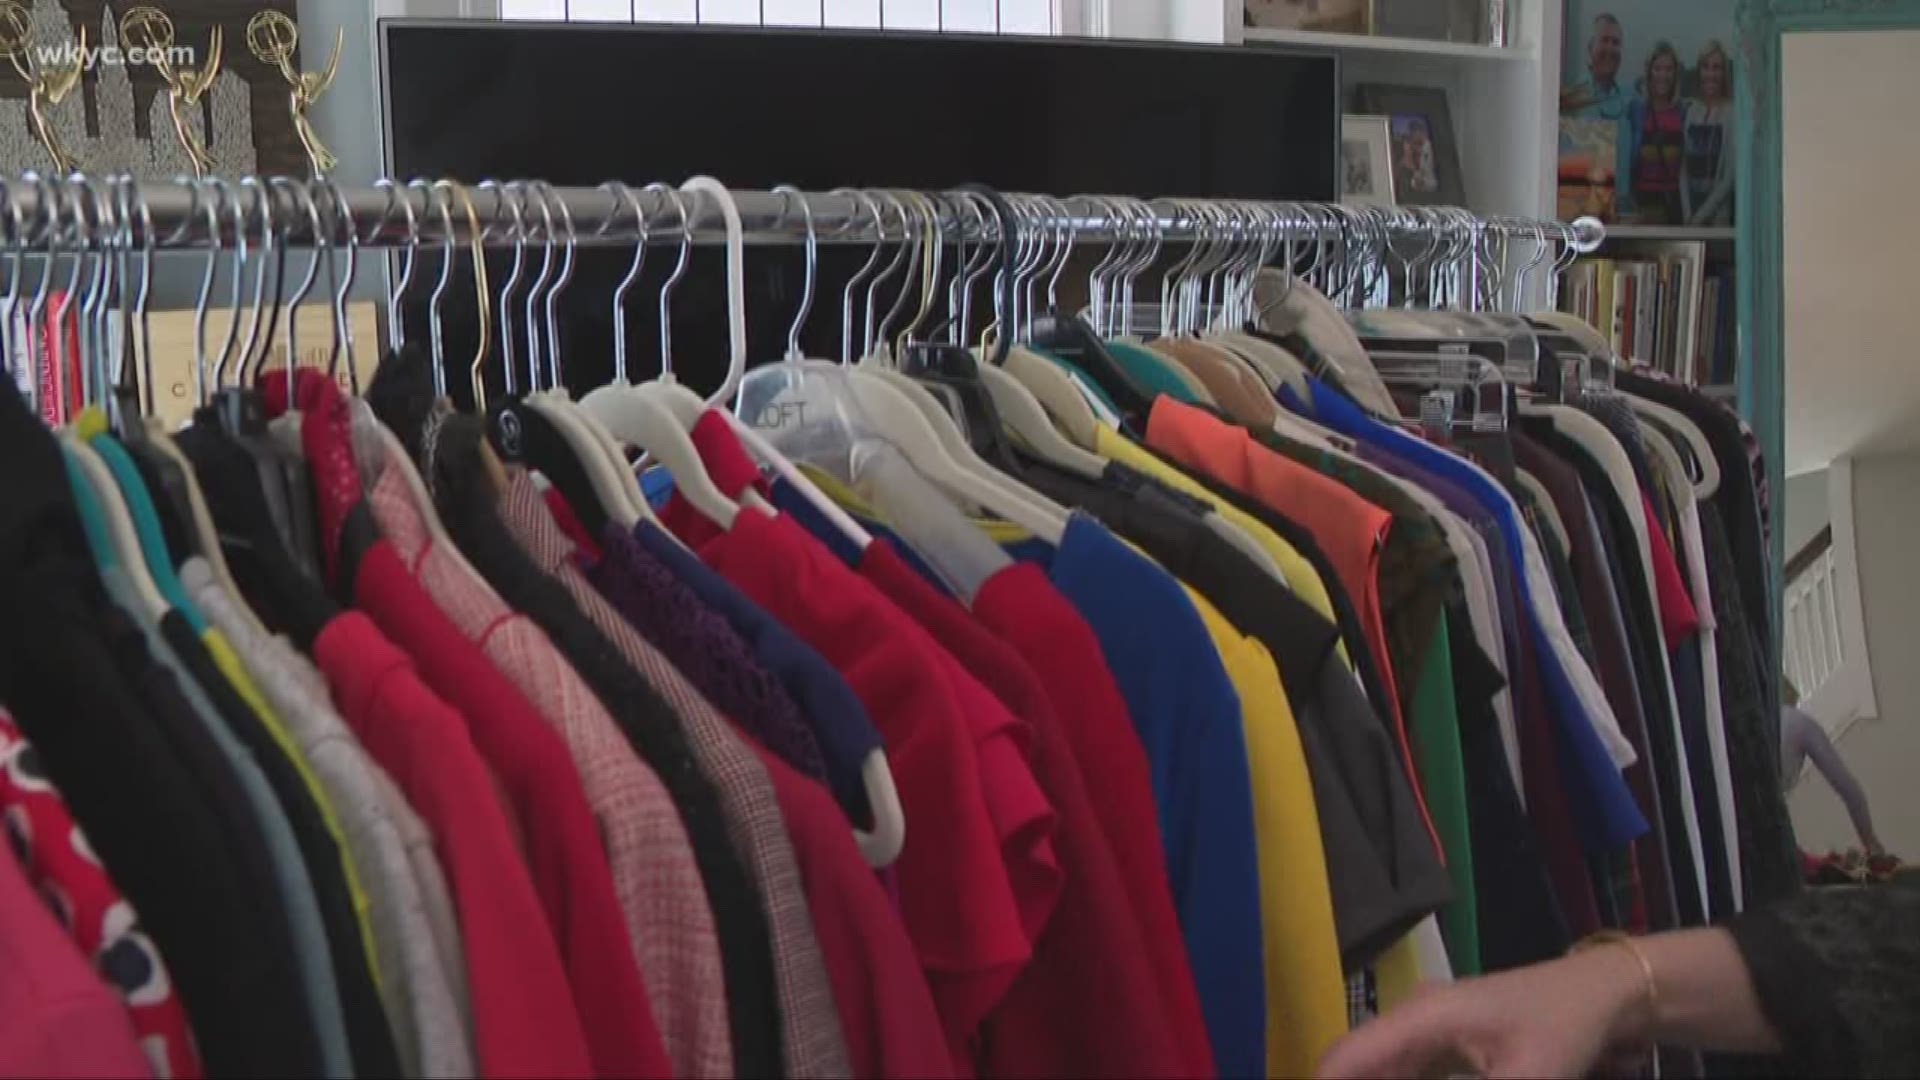 April 30, 2019: It's finally spring in Cleveland, and that means it's time to get organized! Thanks to the ever-growing appeal of organizing expert Marie Kondo (and her Netflix series 'Tidying Up,') home organizing is more top of mind than ever. And WKYC's Sara Shookman was feeling ready for some tidying up of her own. So with a closet packed full of clothes, she decided to call in the pros: Hallie Abrams and Elana Mintz from The Wardrobe Consultant for some help.